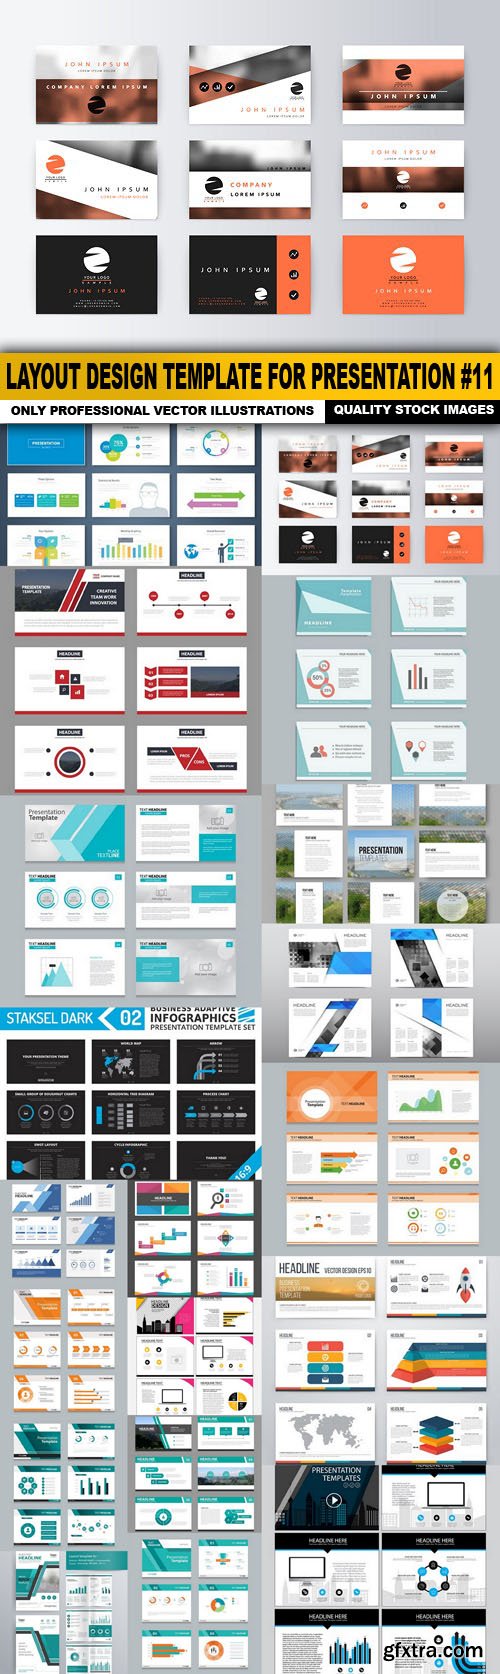 Layout Design Template For Presentation #11 - 20 Vector